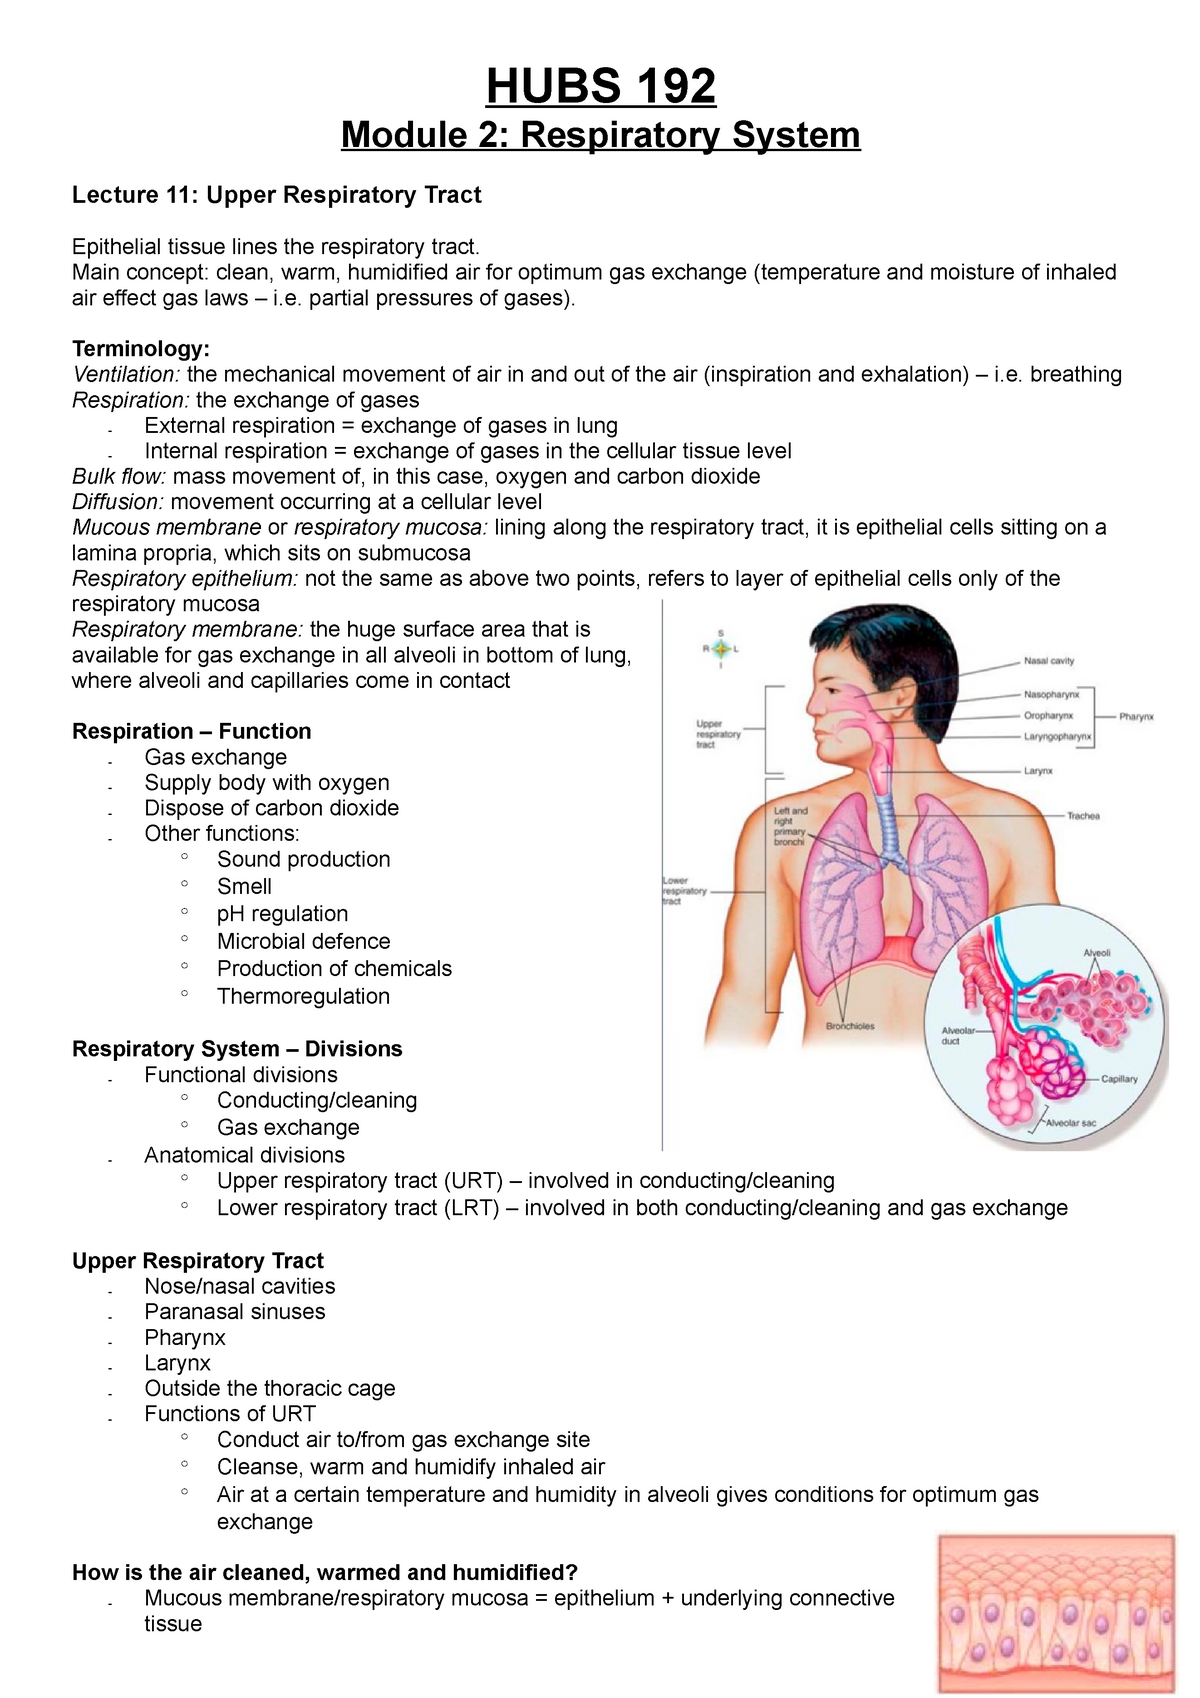 Hubs 192 Lecture Notes Respiratory System Hubs 192 Module 2 Respiratory System Lecture 11